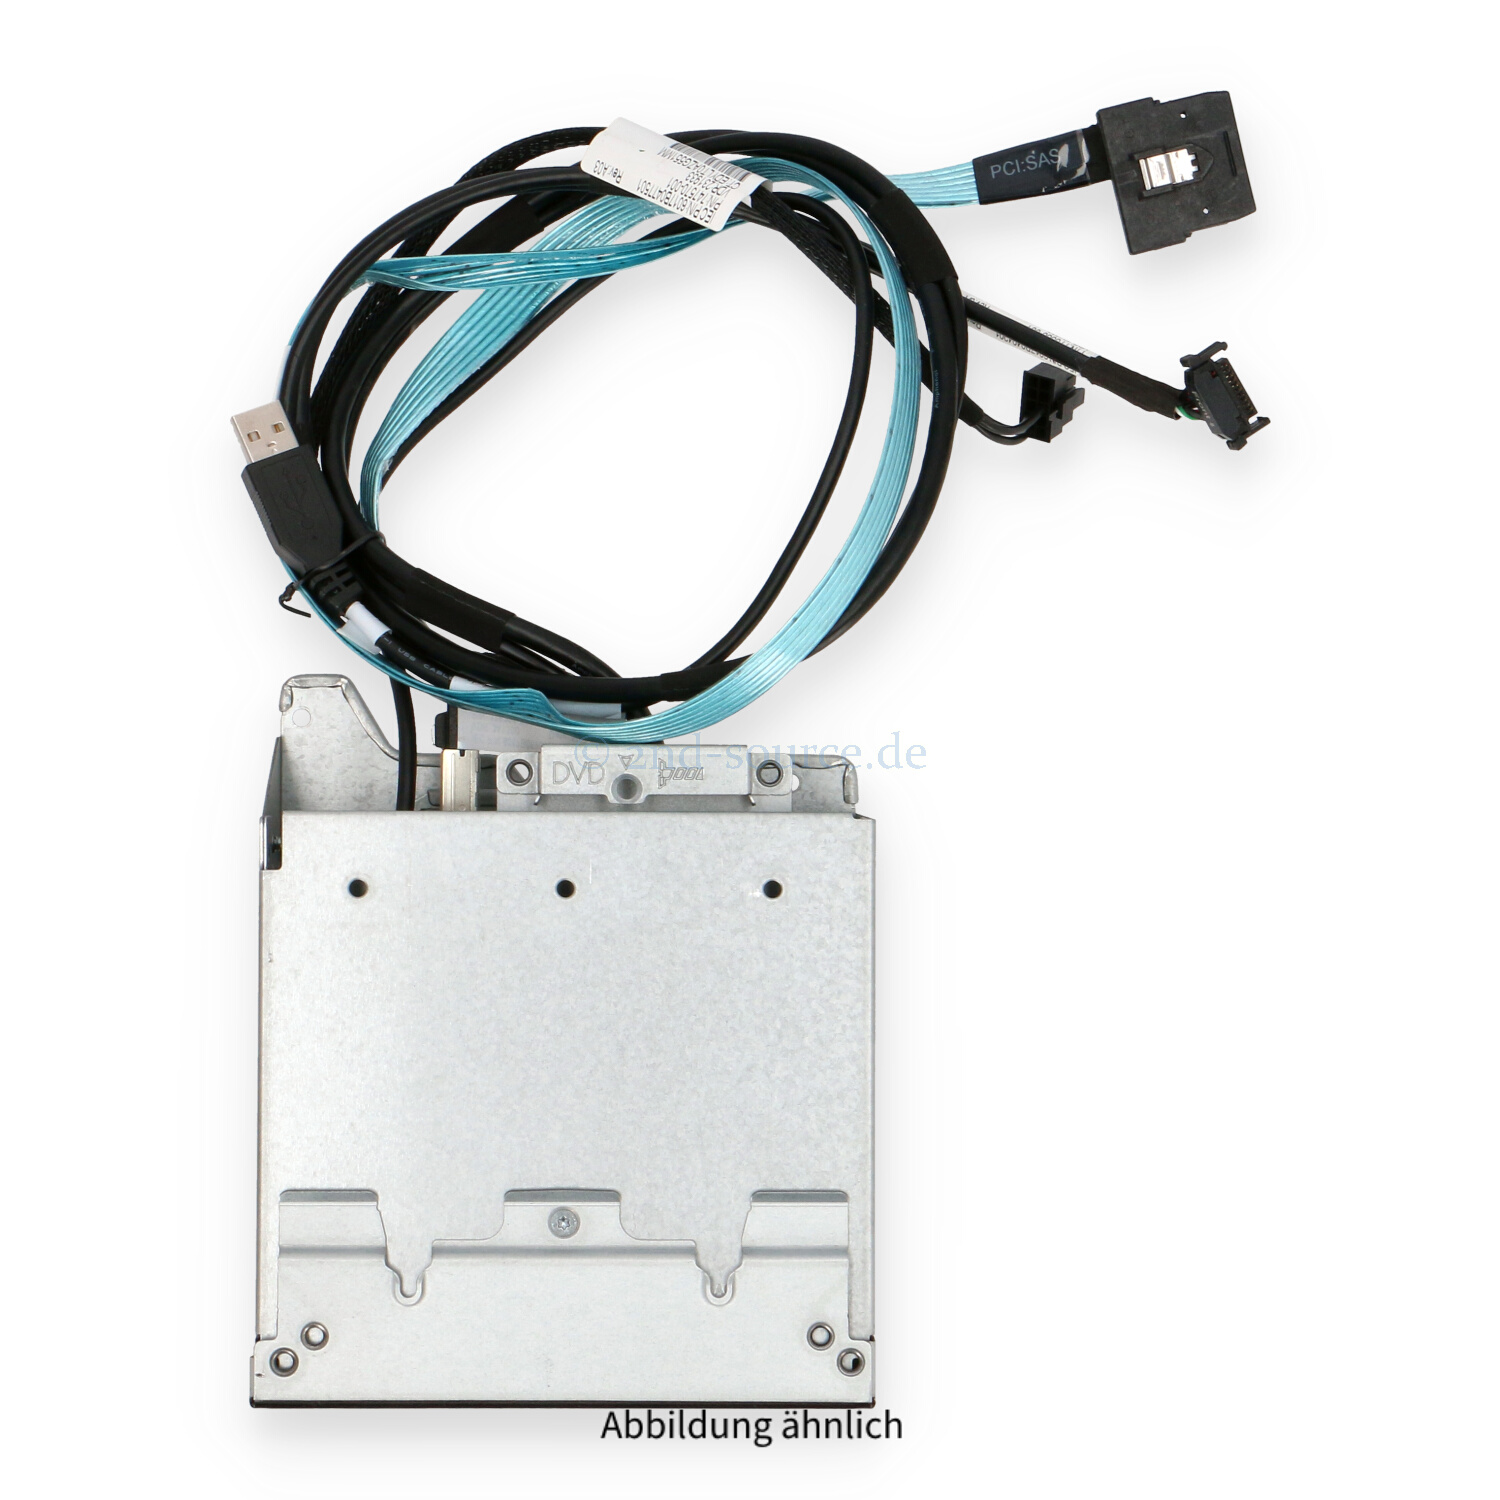 HPE Universal Media Bay +2x2.5'' SFF Drive Cage DL380 Gen9 786579-001 777280-001